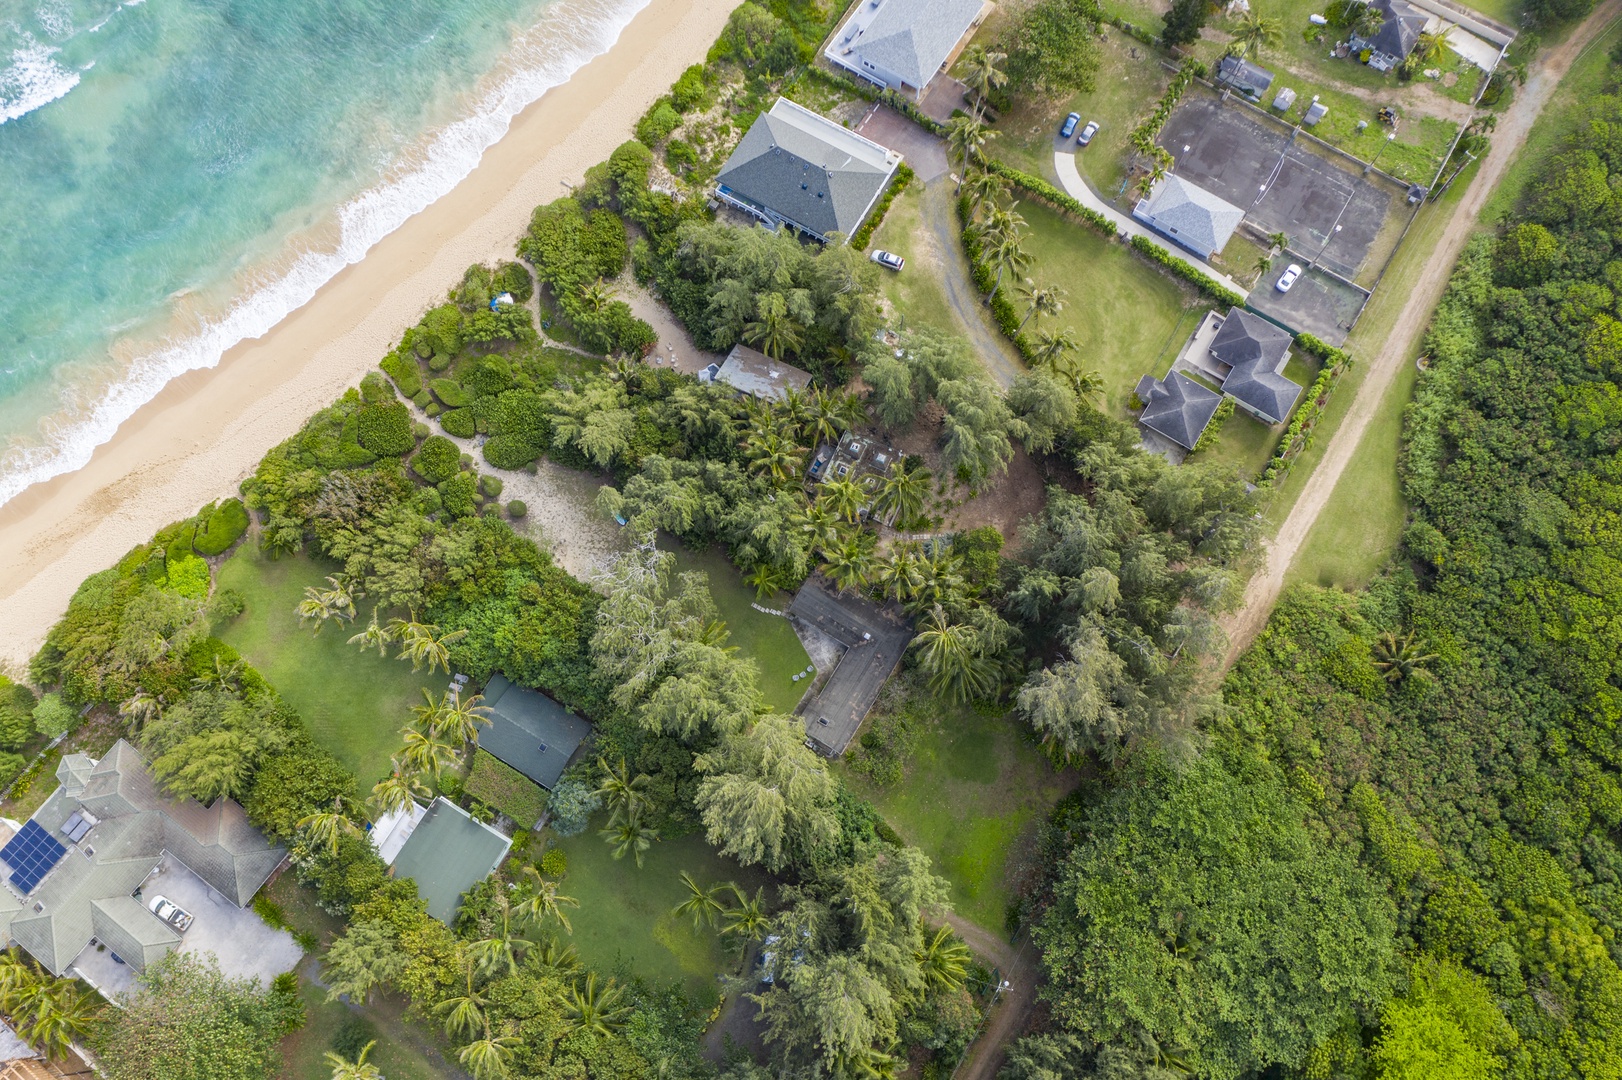 Kahuku Vacation Rentals, Hale Ula Ula - Only a few homes sit beachfront on this stretch of beach, known for its white sand and turquoise waters